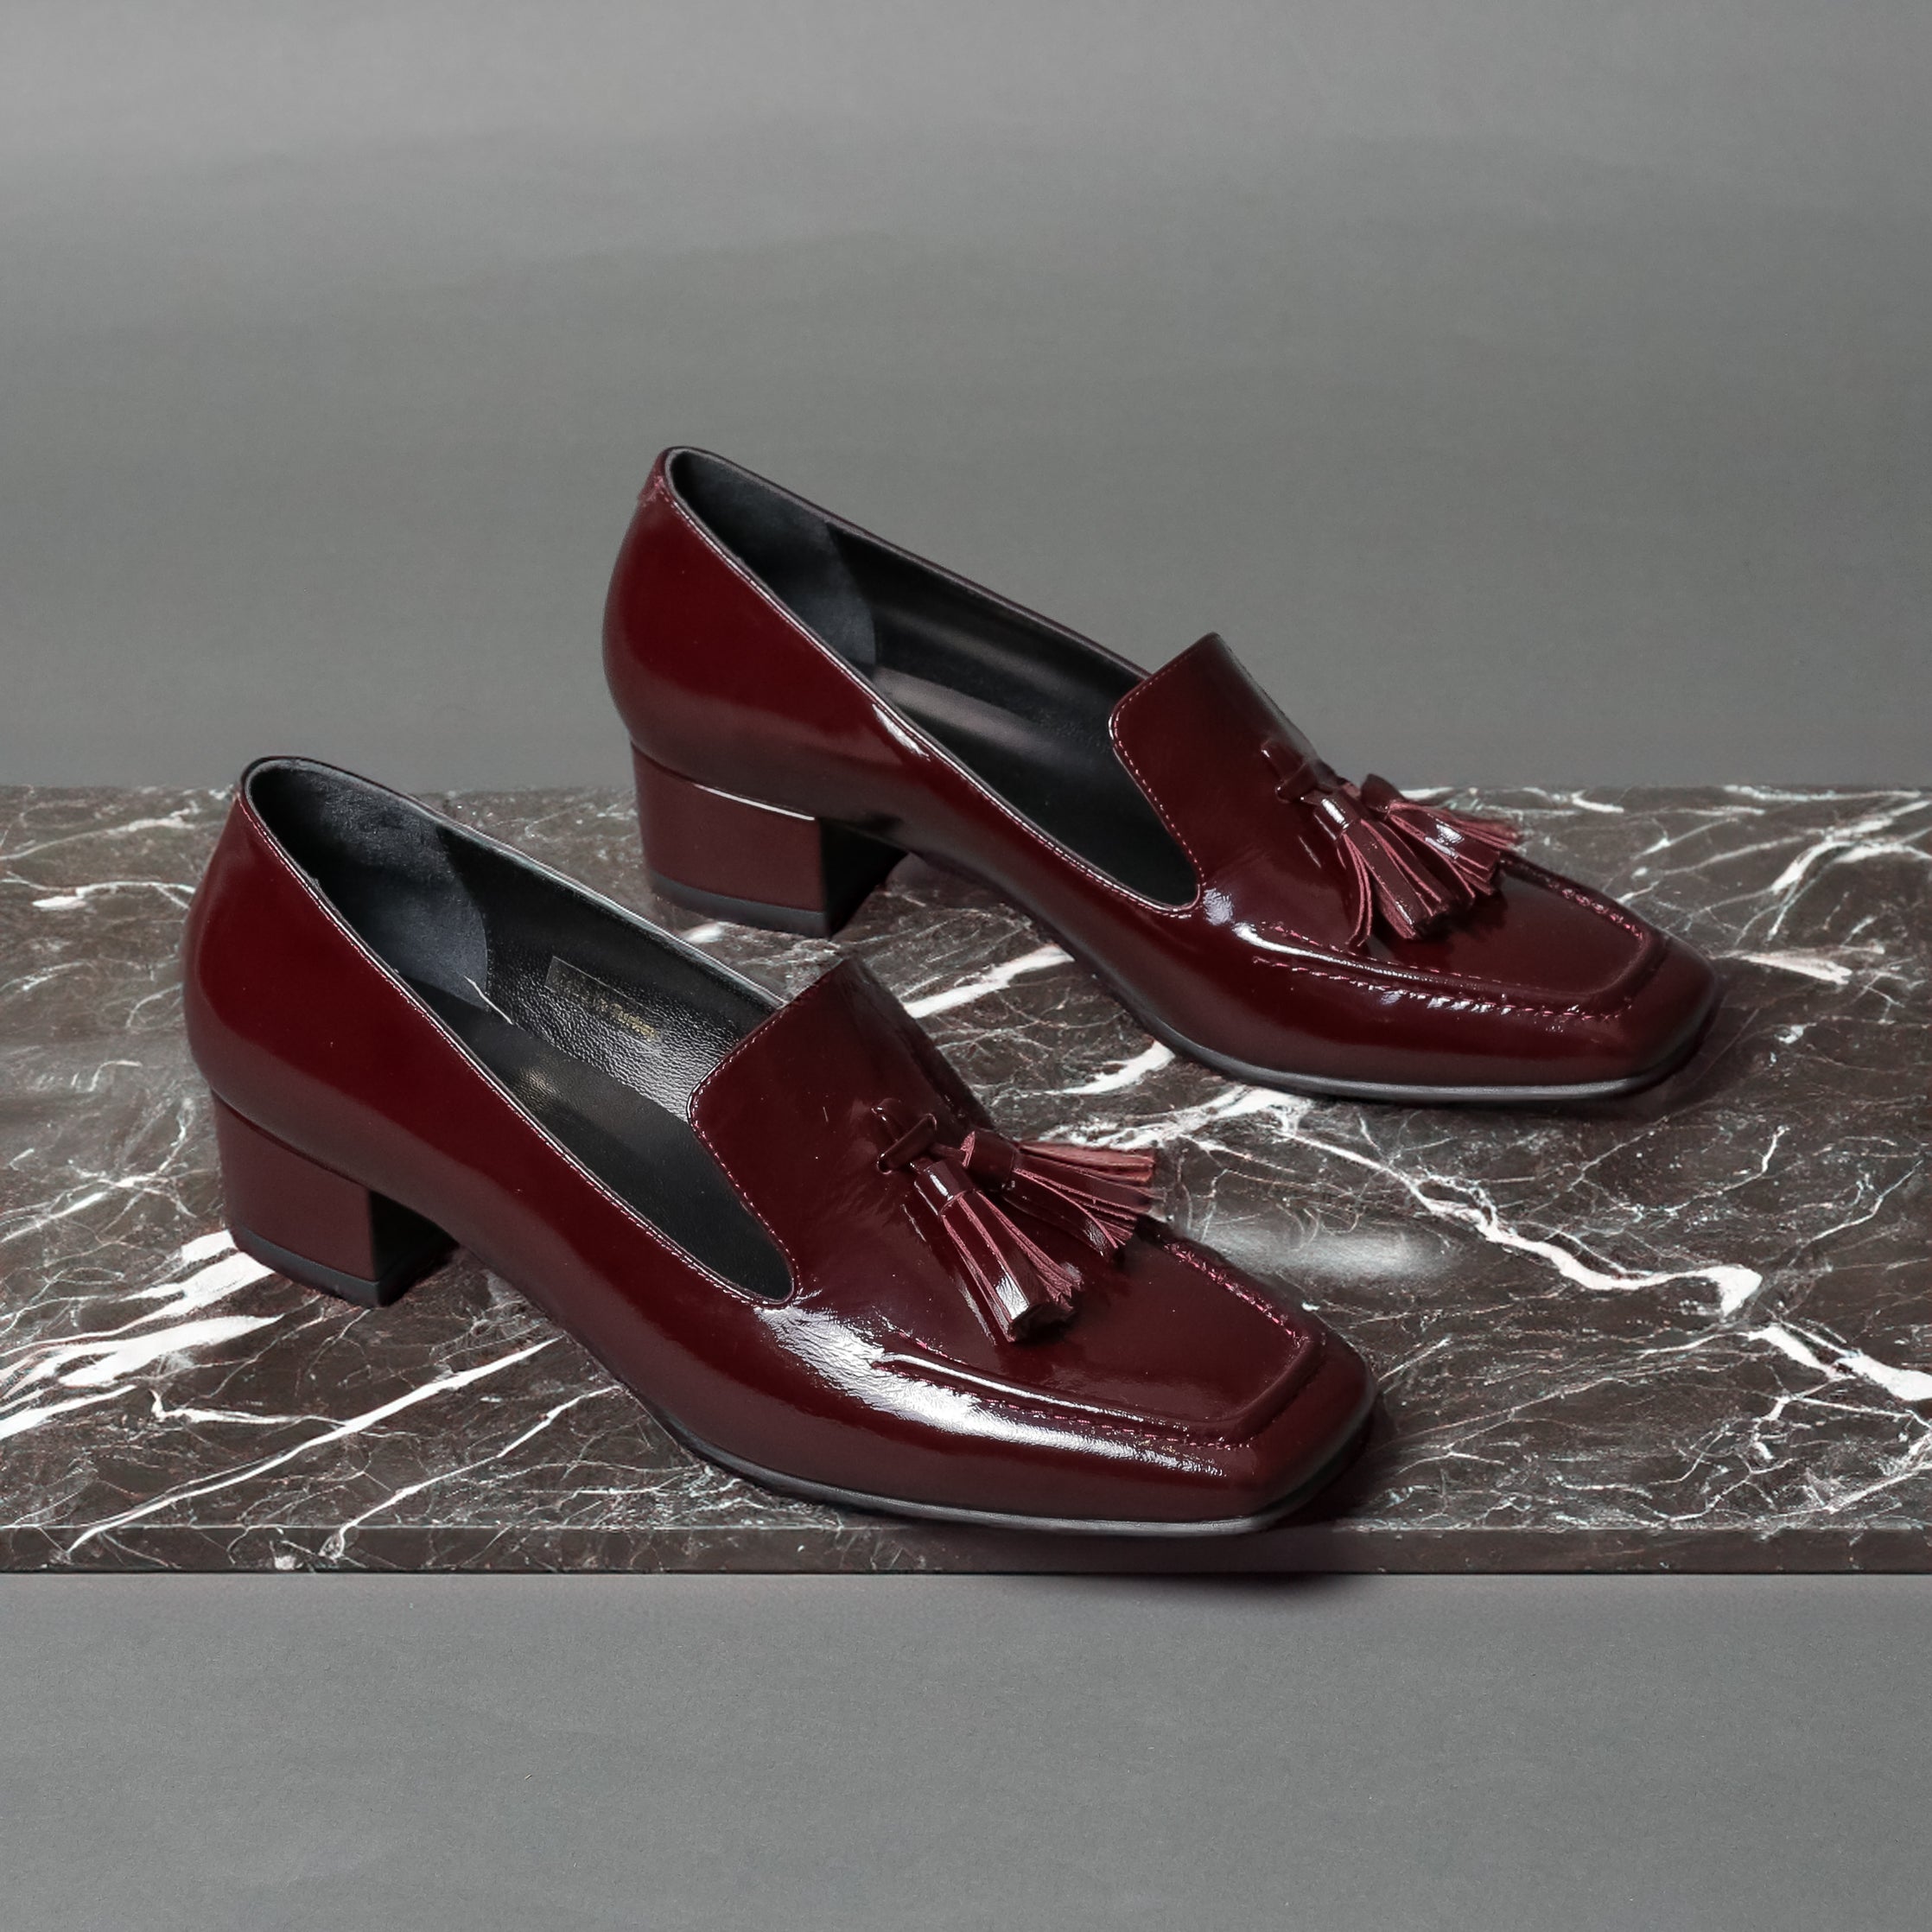 A024 Burgundy - 124 Shoes